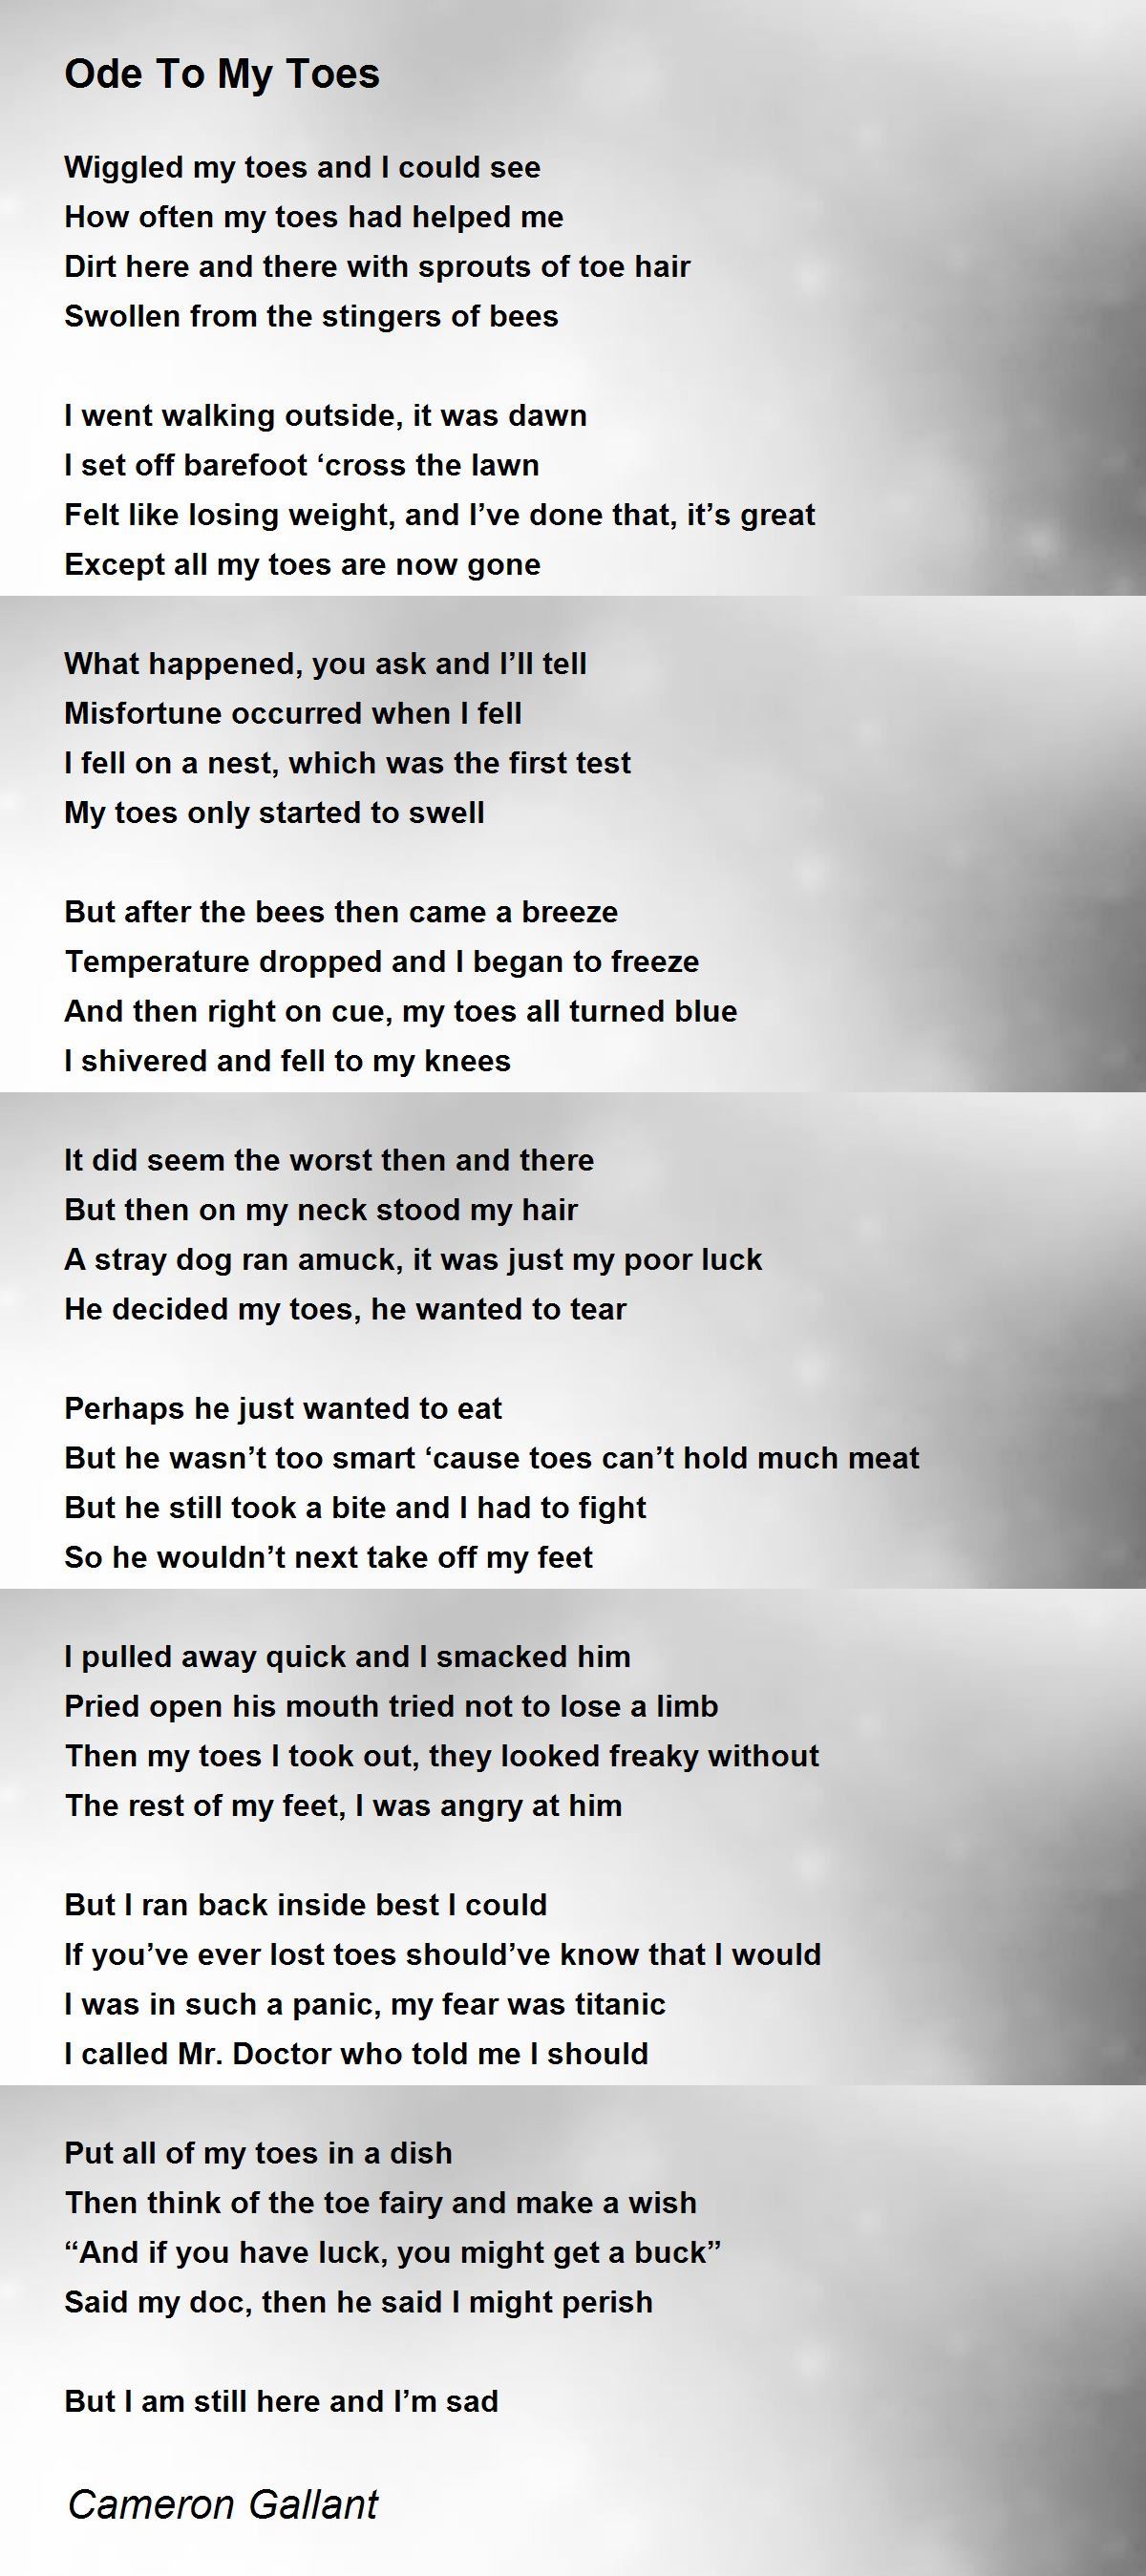 Ode To My Toes - Ode To My Toes Poem by Cameron Gallant